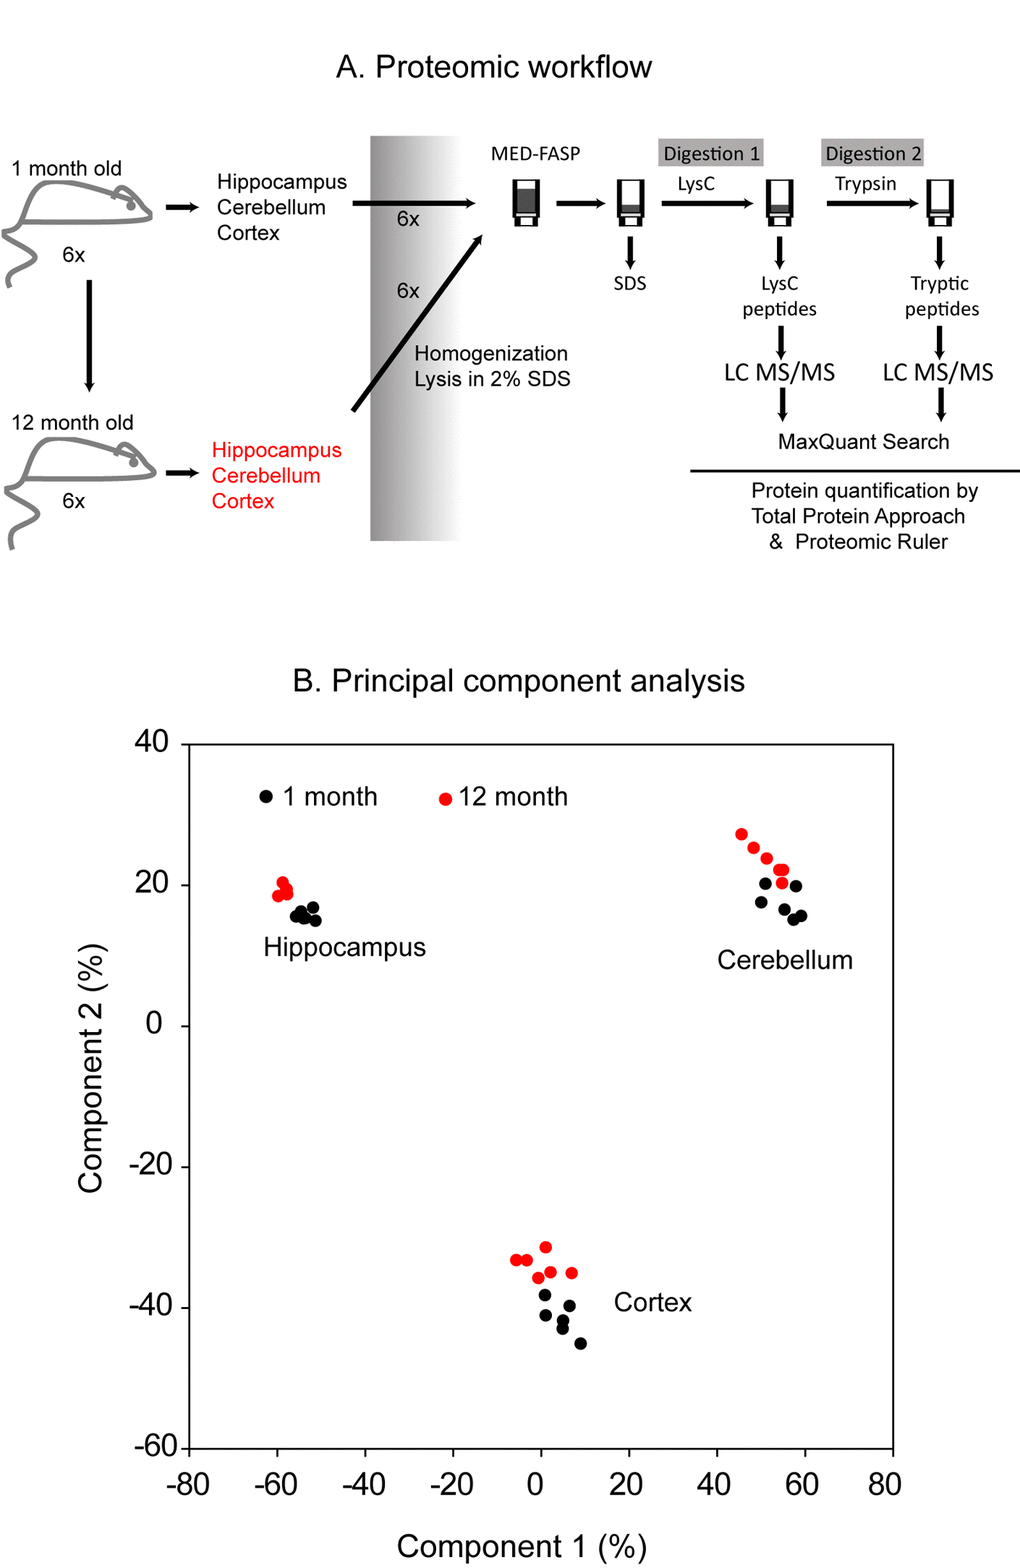 Proteomic workflow. Cerebellum, cortex and hippocampus were isolated from 1 month- and 1 year-old mice. Six animals were used to analysis at each age. The tissues were homogenized and lysed in a buffer containing 2% SDS. The lysates were processed with the multiple enzyme digestion filter aided sample preparation (MED FASP) method using consecutive cleavage with LysC and trypsin. The protein digests were analyzed by LC-MS/MS and the spectra were processed with MaxQuant software. Specific protein concentrations (mol/g total protein) were obtained by the ‘Total Protein Approach’ and protein copy numbers were assessed using the ‘Proteomic Ruler’ method (A). Principal component analysis based on the protein concentration values. Only proteins with at least 2 peptides were considered (B).